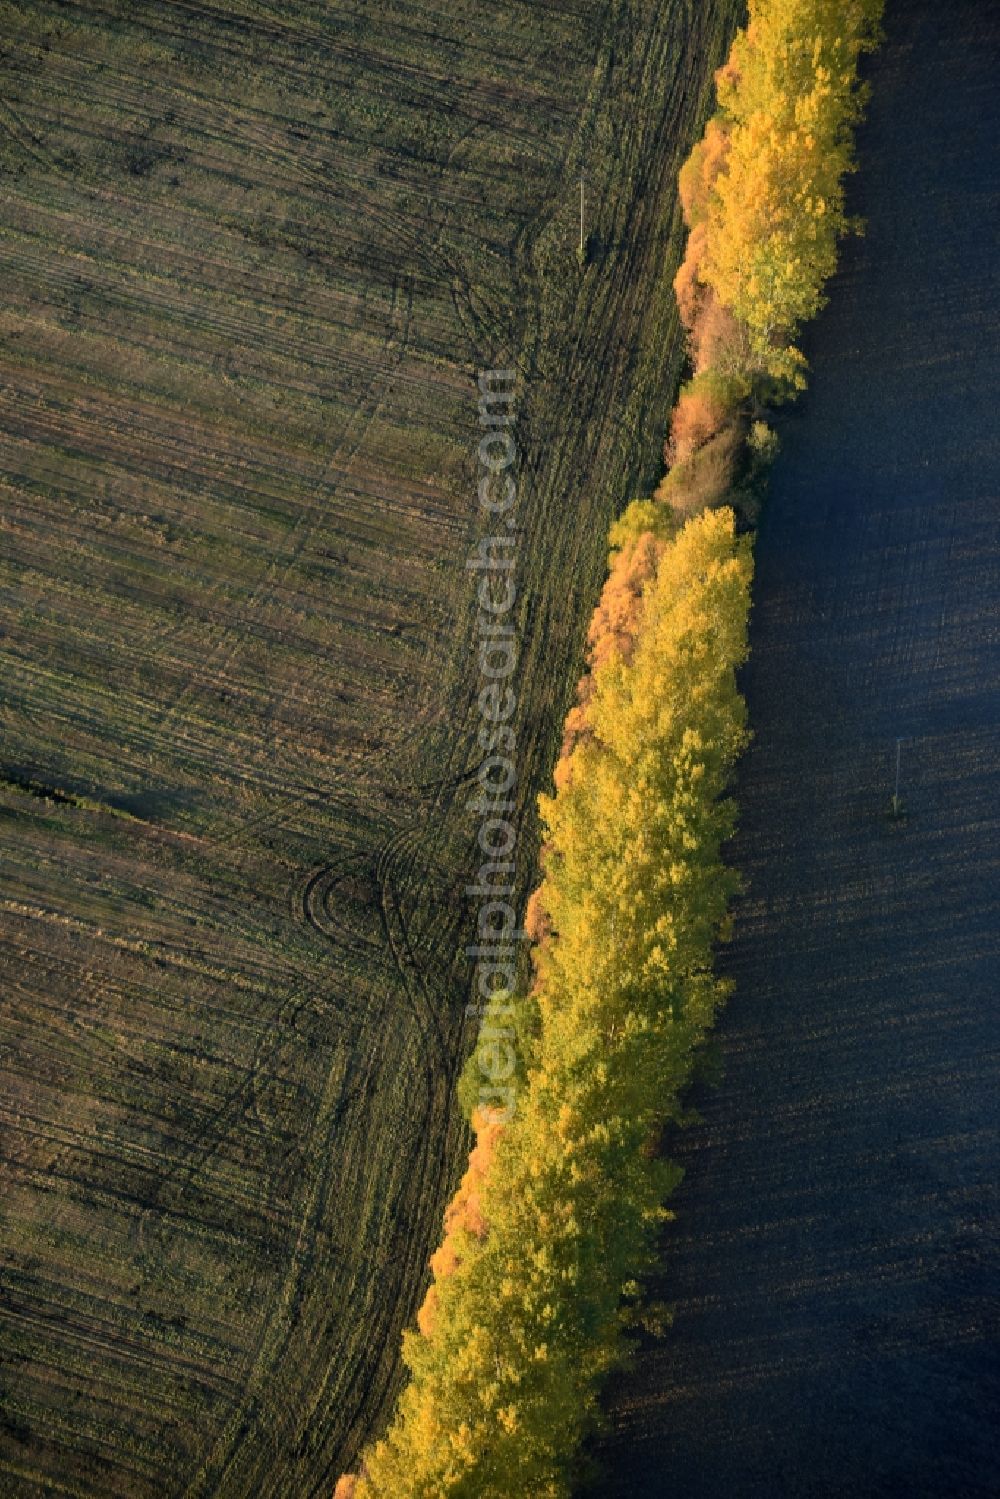 Nuthe-Urstromtal from above - Autumnal yellow- colored row of trees in a field edge in Nuthe-Urstromtal in the state Brandenburg